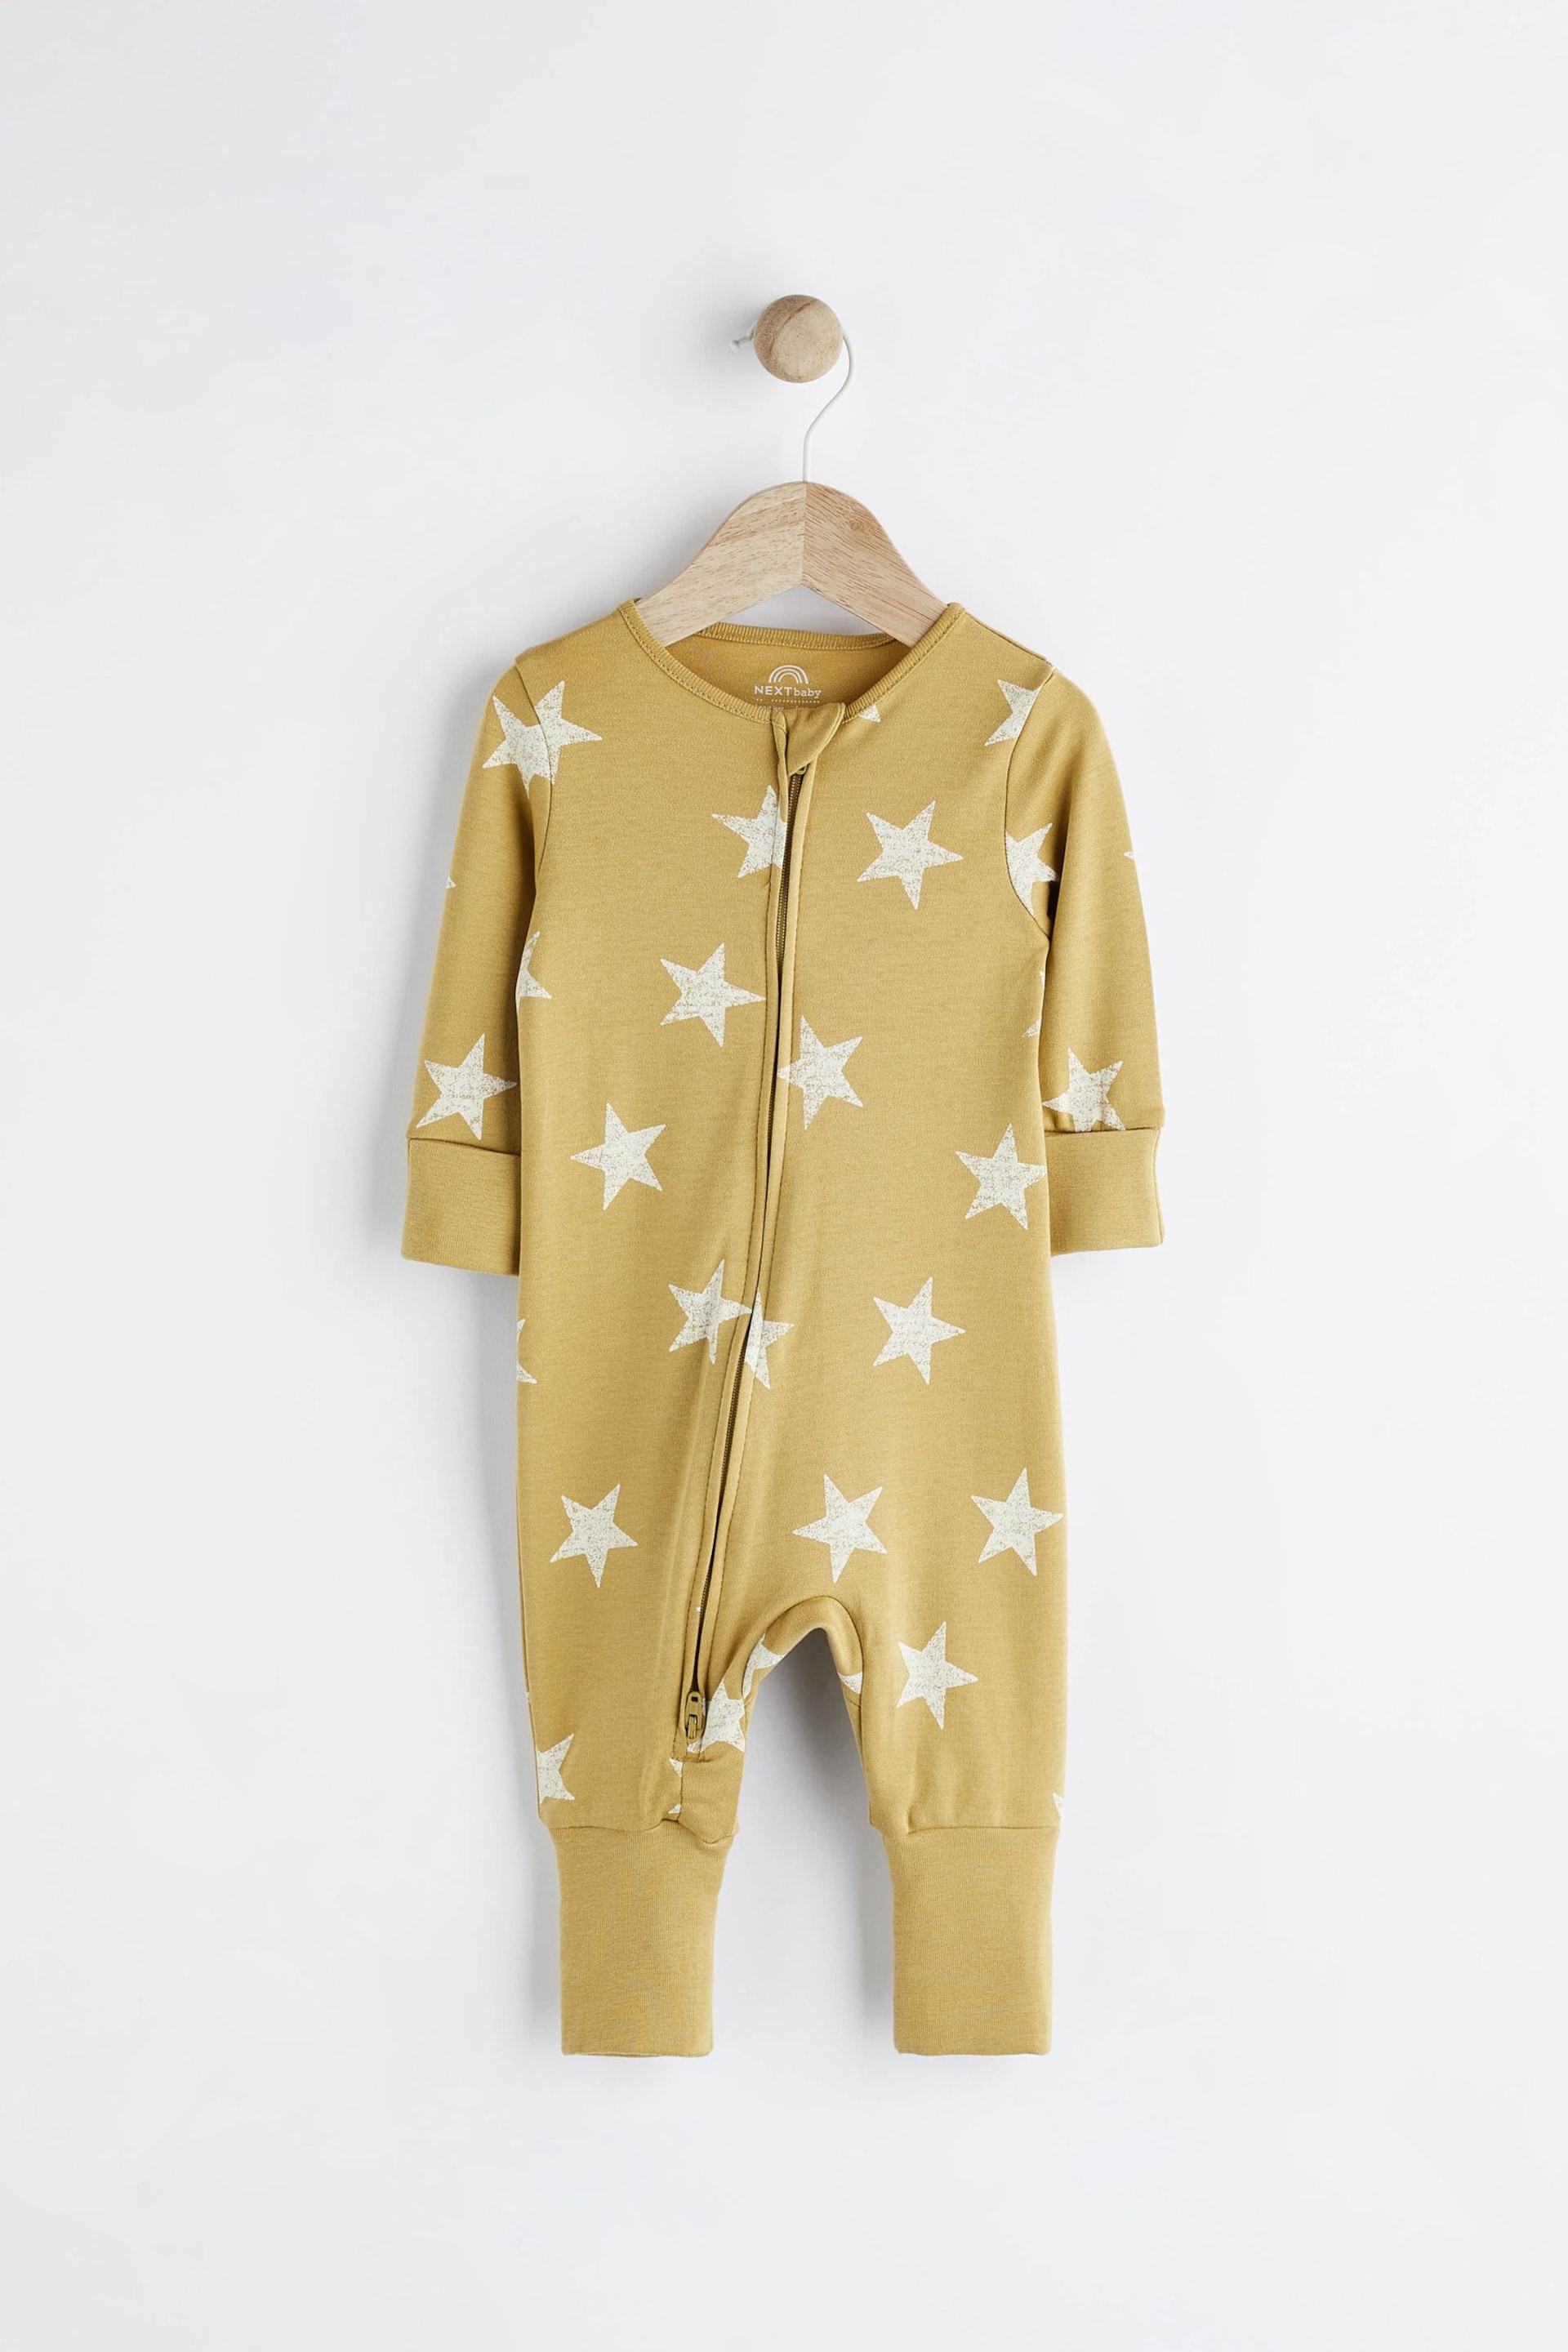 Chartreuse Yellow Turnover Feet Two Way Zip Baby Sleepsuit 1 Pack (0mths-3yrs) - Image 6 of 14